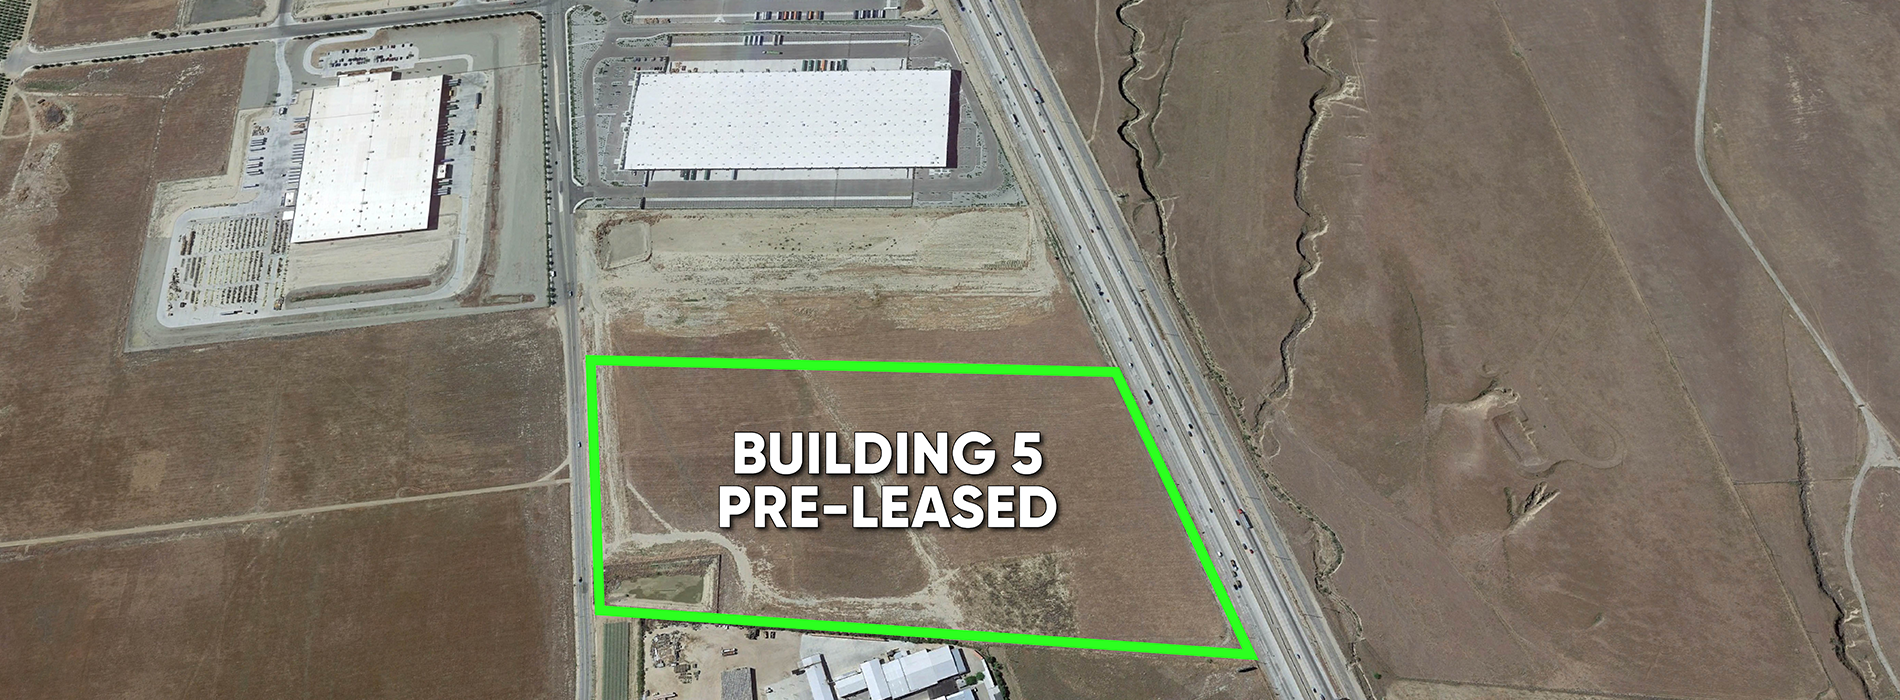 TEJON RANCH CO. AND MAJESTIC REALTY CO. JOINT VENTURE ANNOUNCE PRE-LEASE OF UPCOMING INDUSTRIAL BUILDING AT THE  TEJON RANCH COMMERCE CENTER (TRCC)